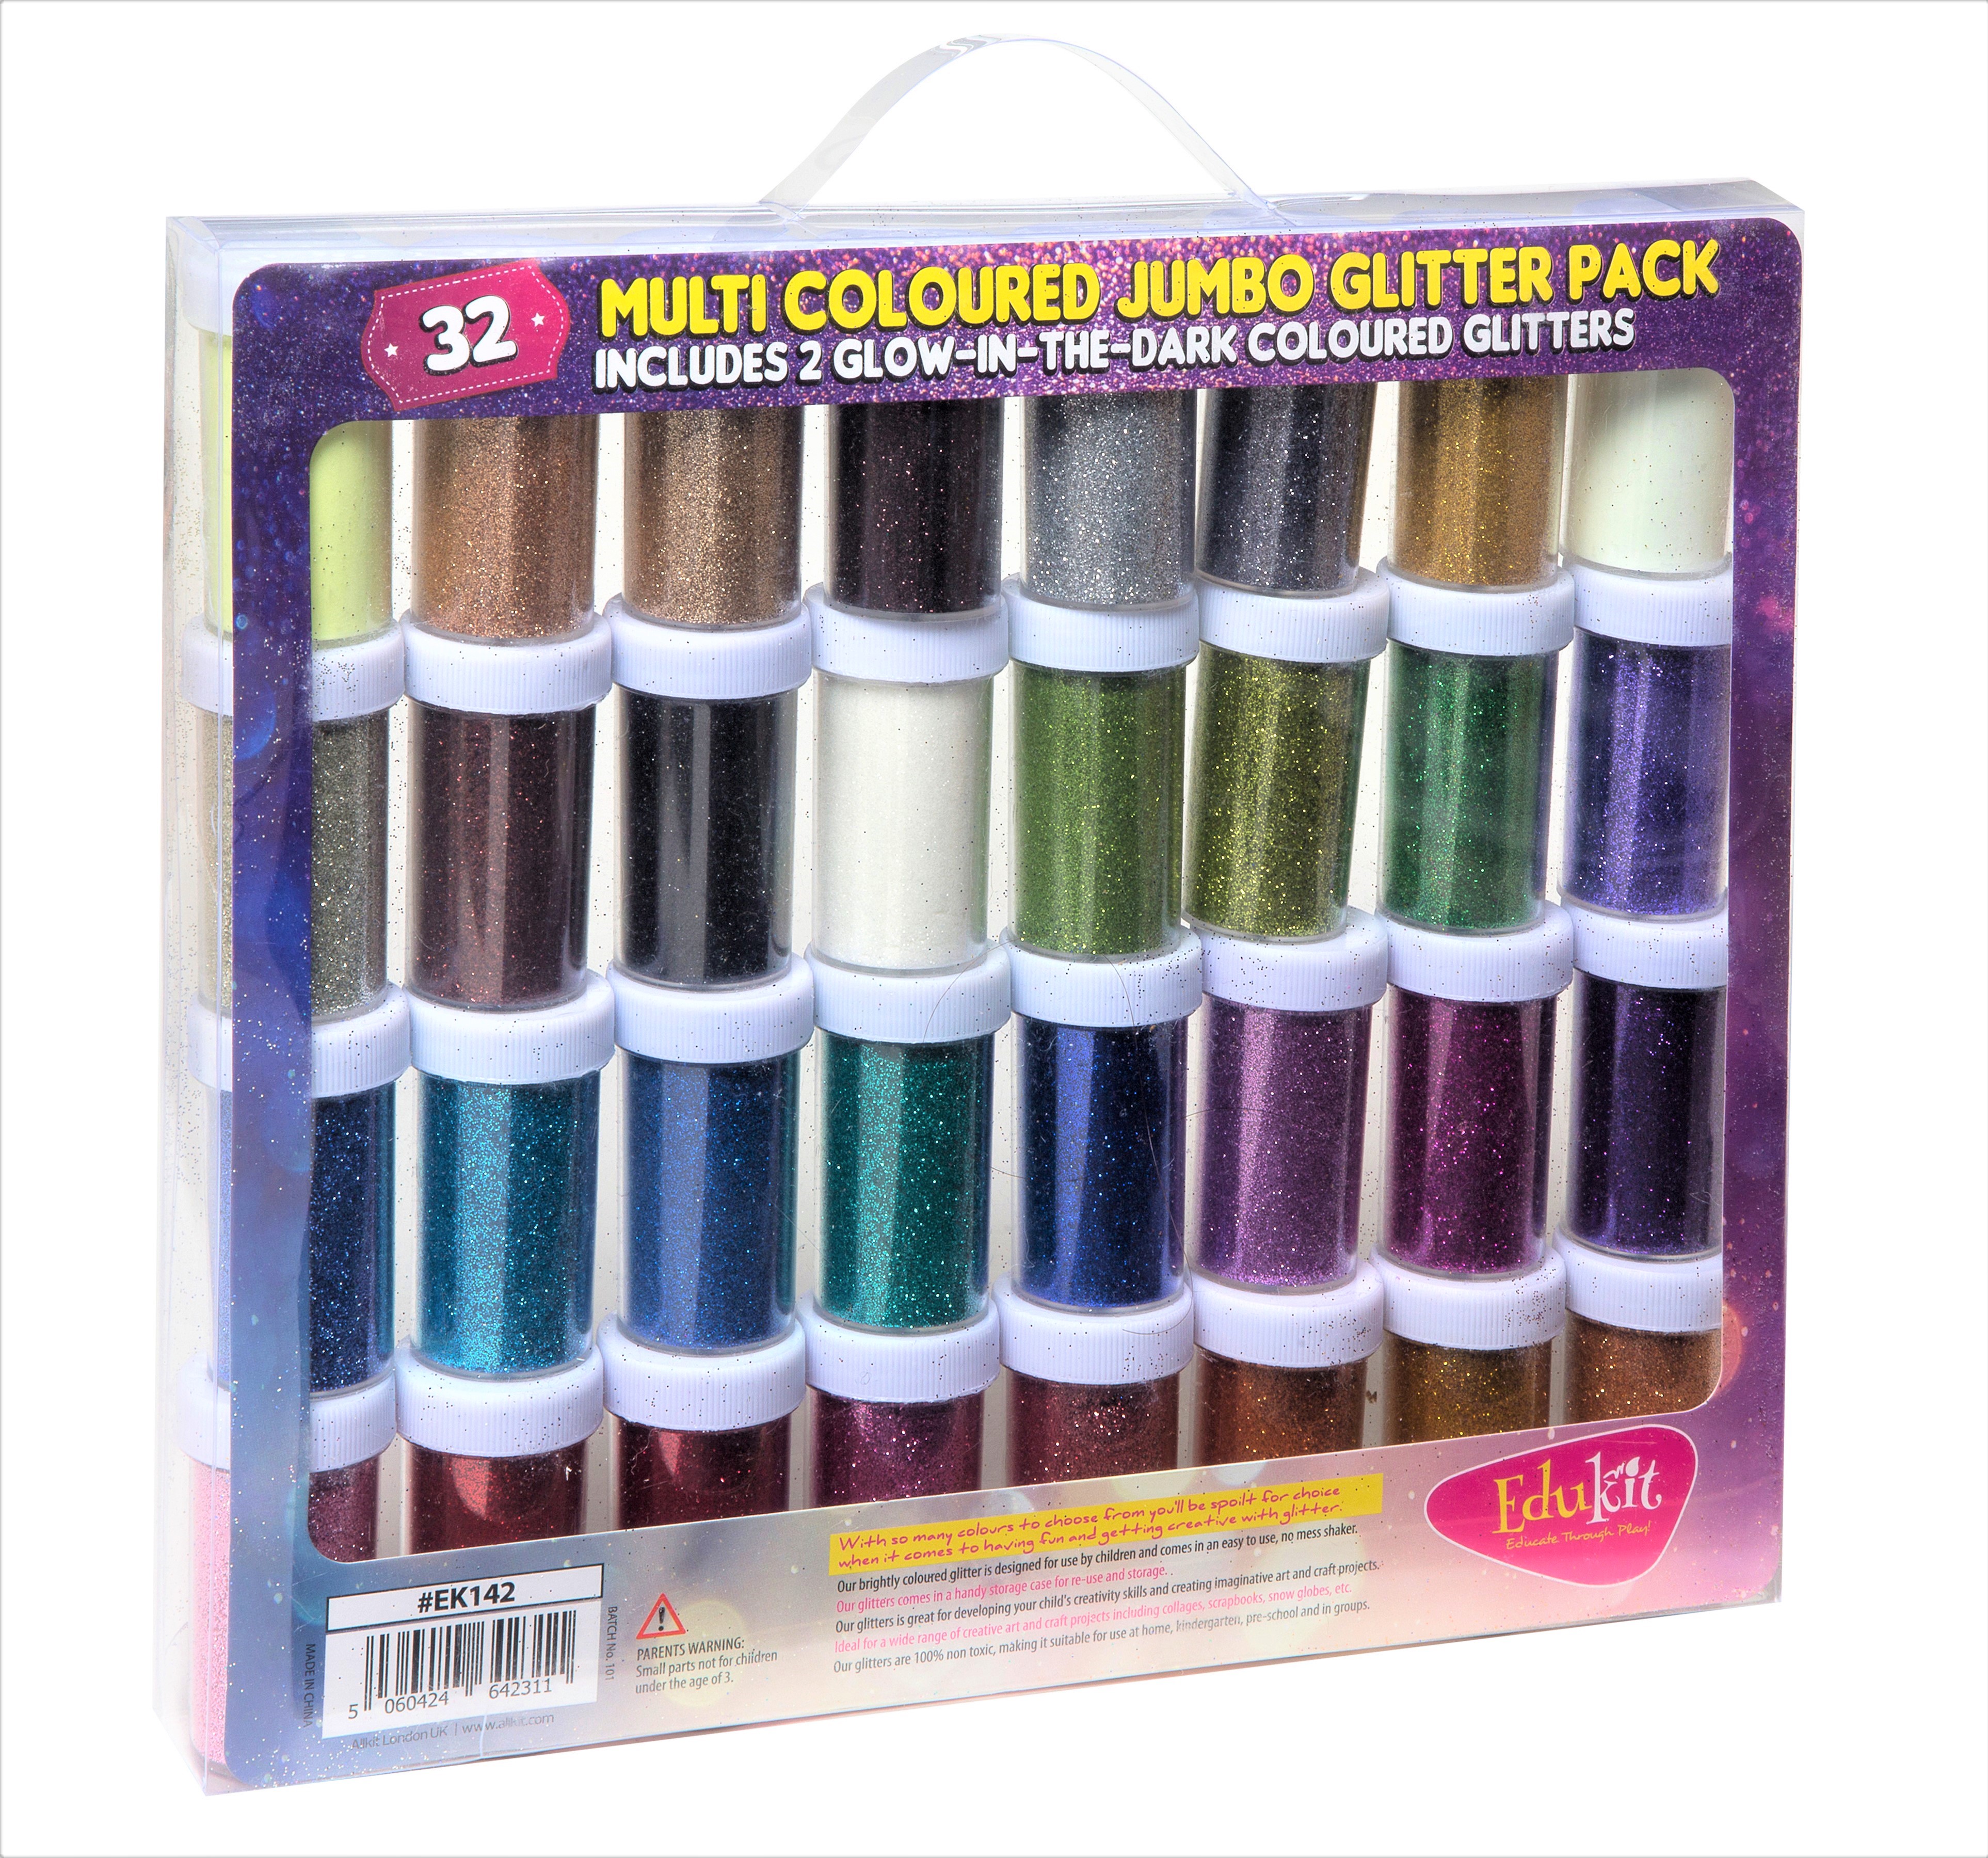 16 Packs of Fine Glitter for Art & Crafts, Nail Art, Face Art & Slime 32 Pack Multi-Coloured Sparkling Glitter Shakers, Included 2 Glow-in-the-Dark Gl